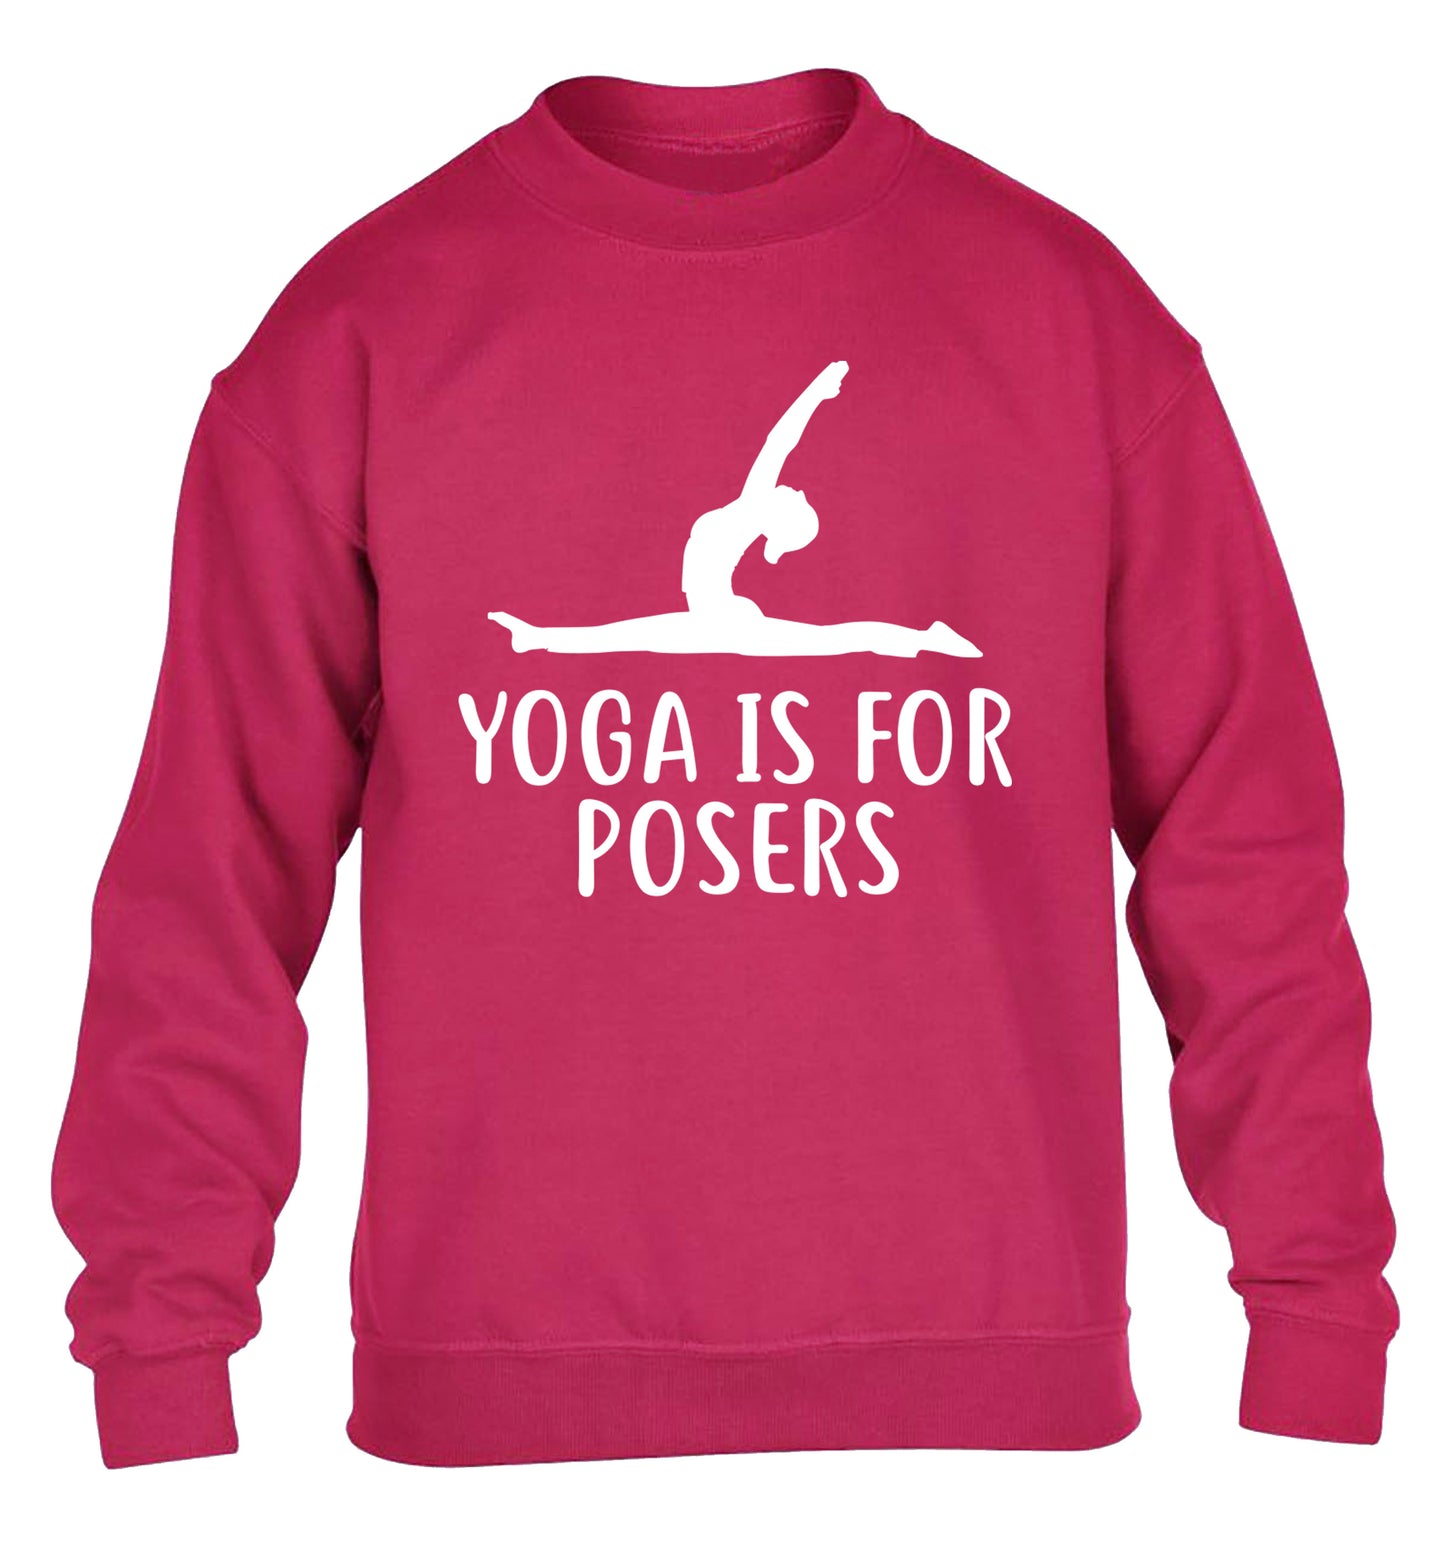 Yoga is for posers children's pink sweater 12-13 Years